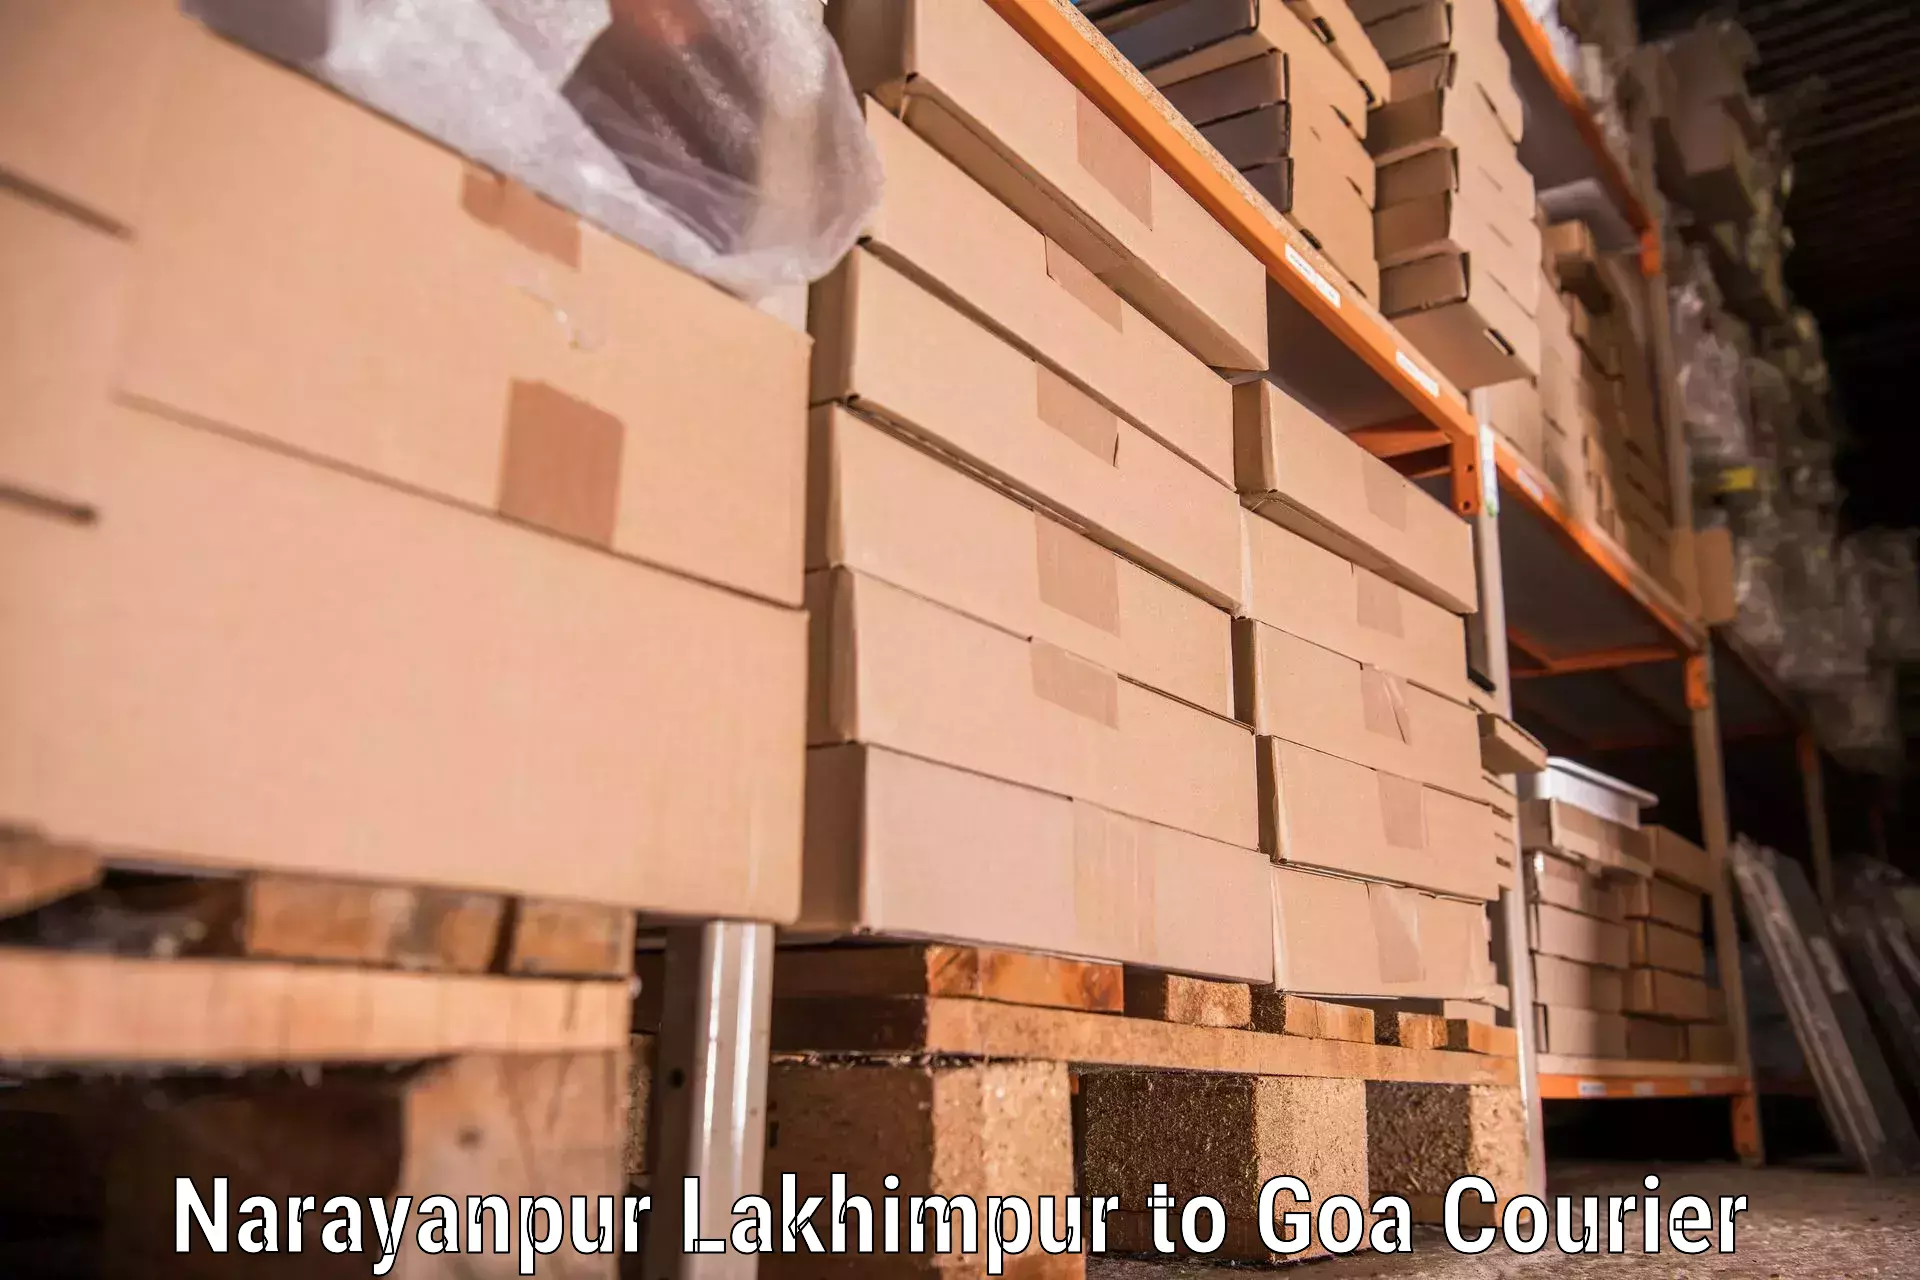 Quality relocation services Narayanpur Lakhimpur to Panjim